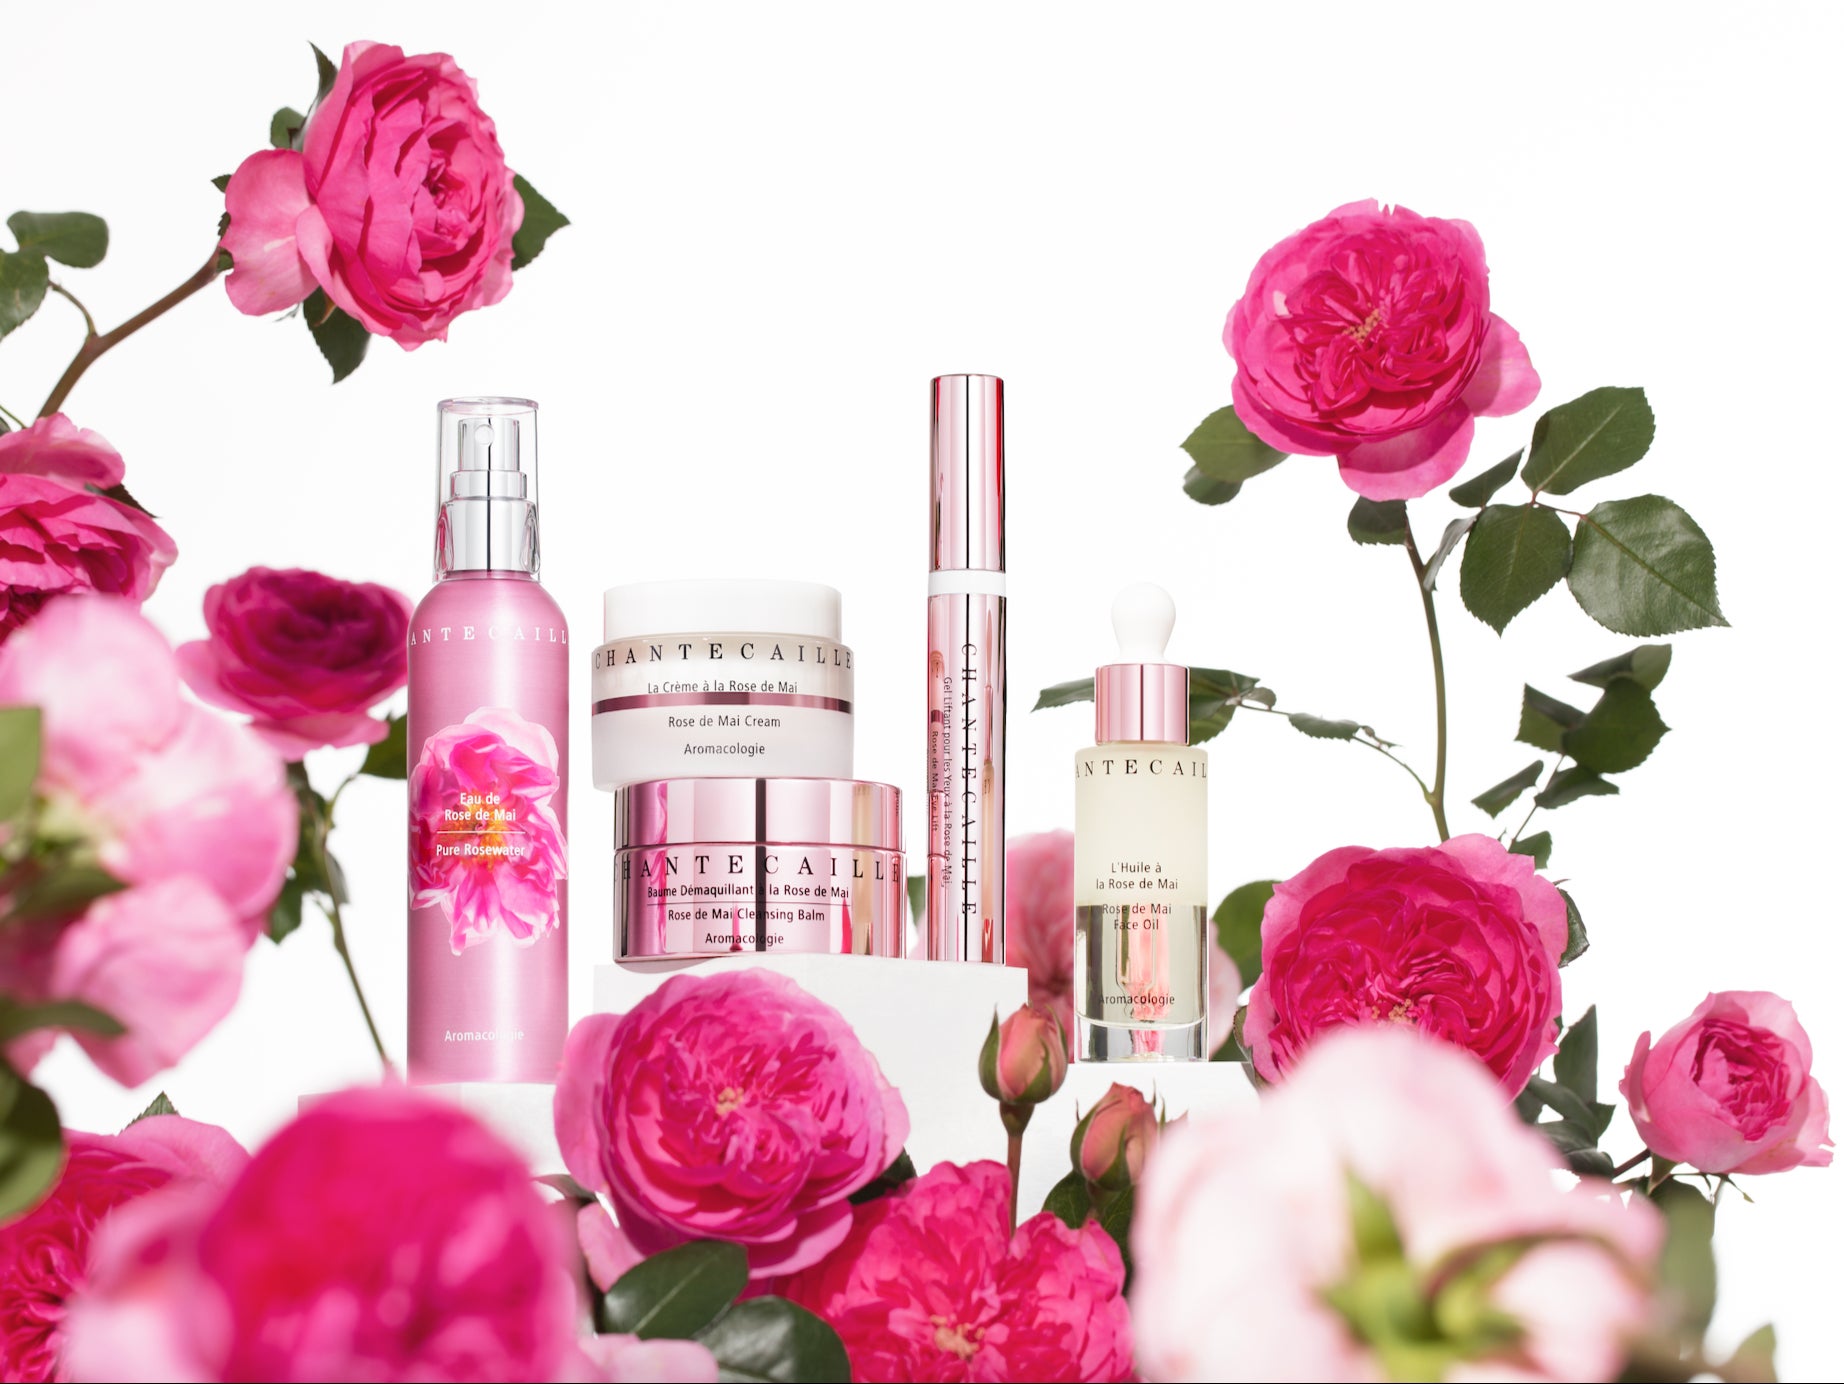 Chantecaille’s Pure Rosewater grew into an entire Rose de Mai collection